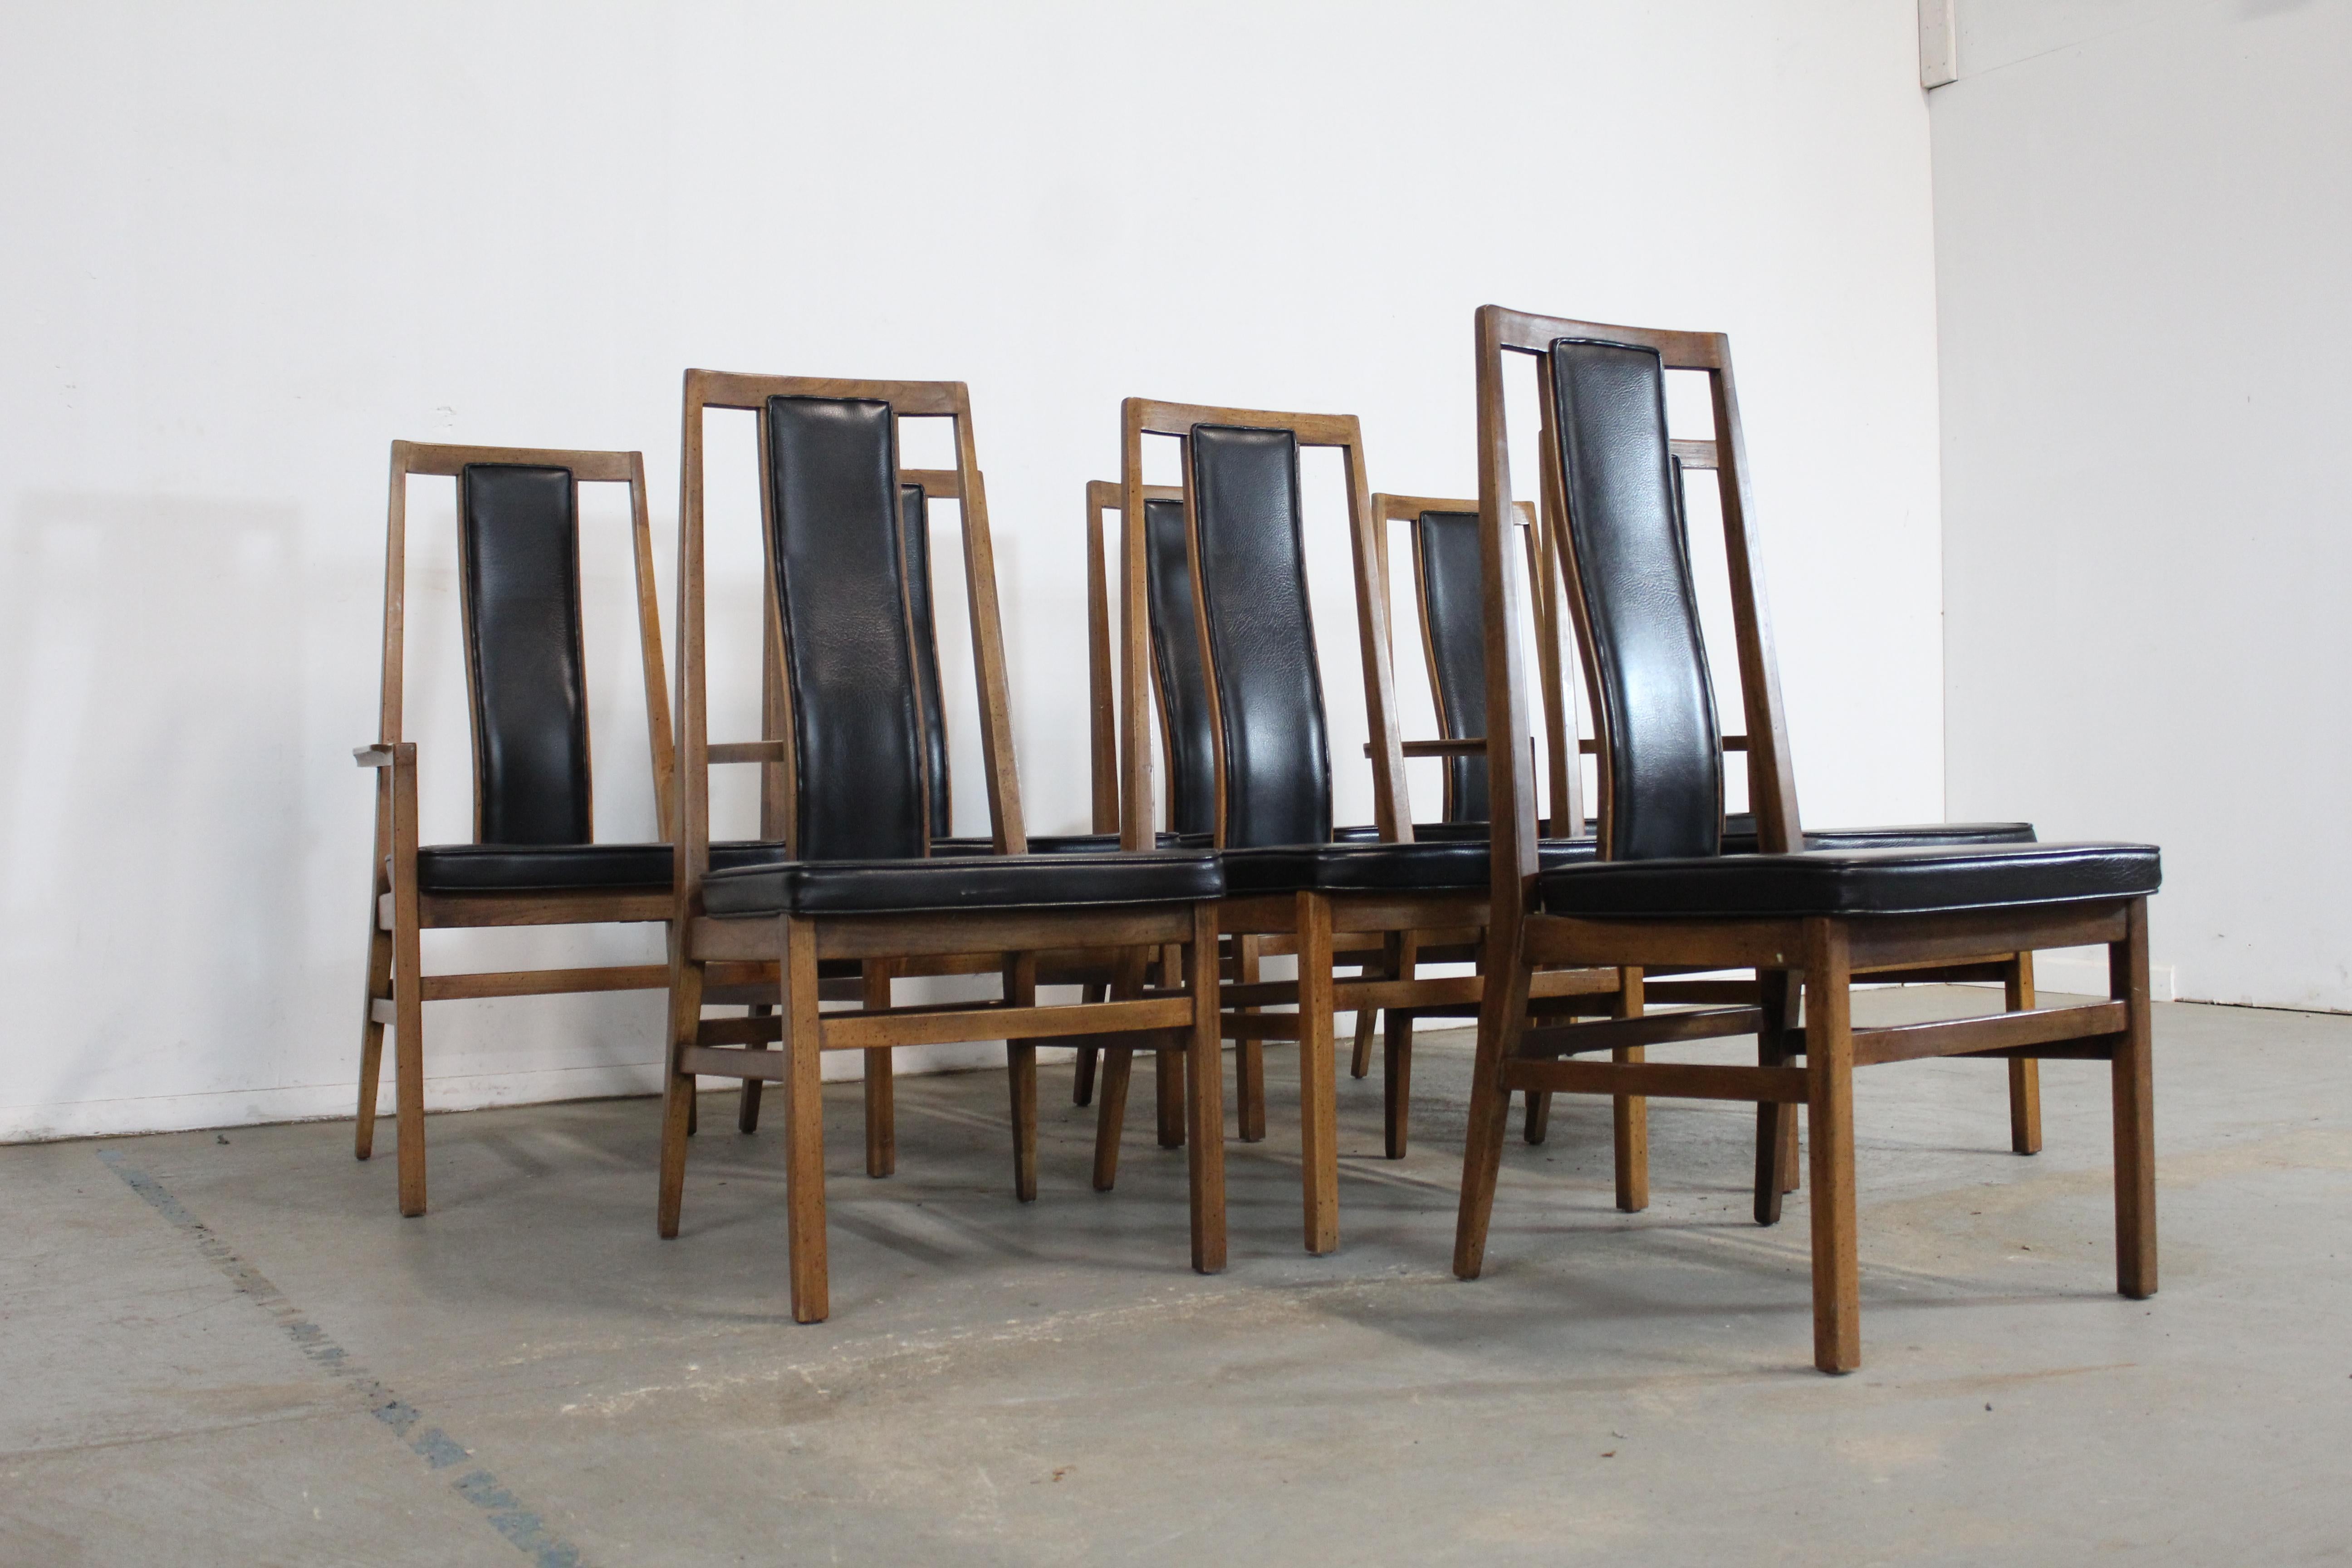 North American Set of 8 Mid-Century Modern Tall Back Dining Chairs by Founders